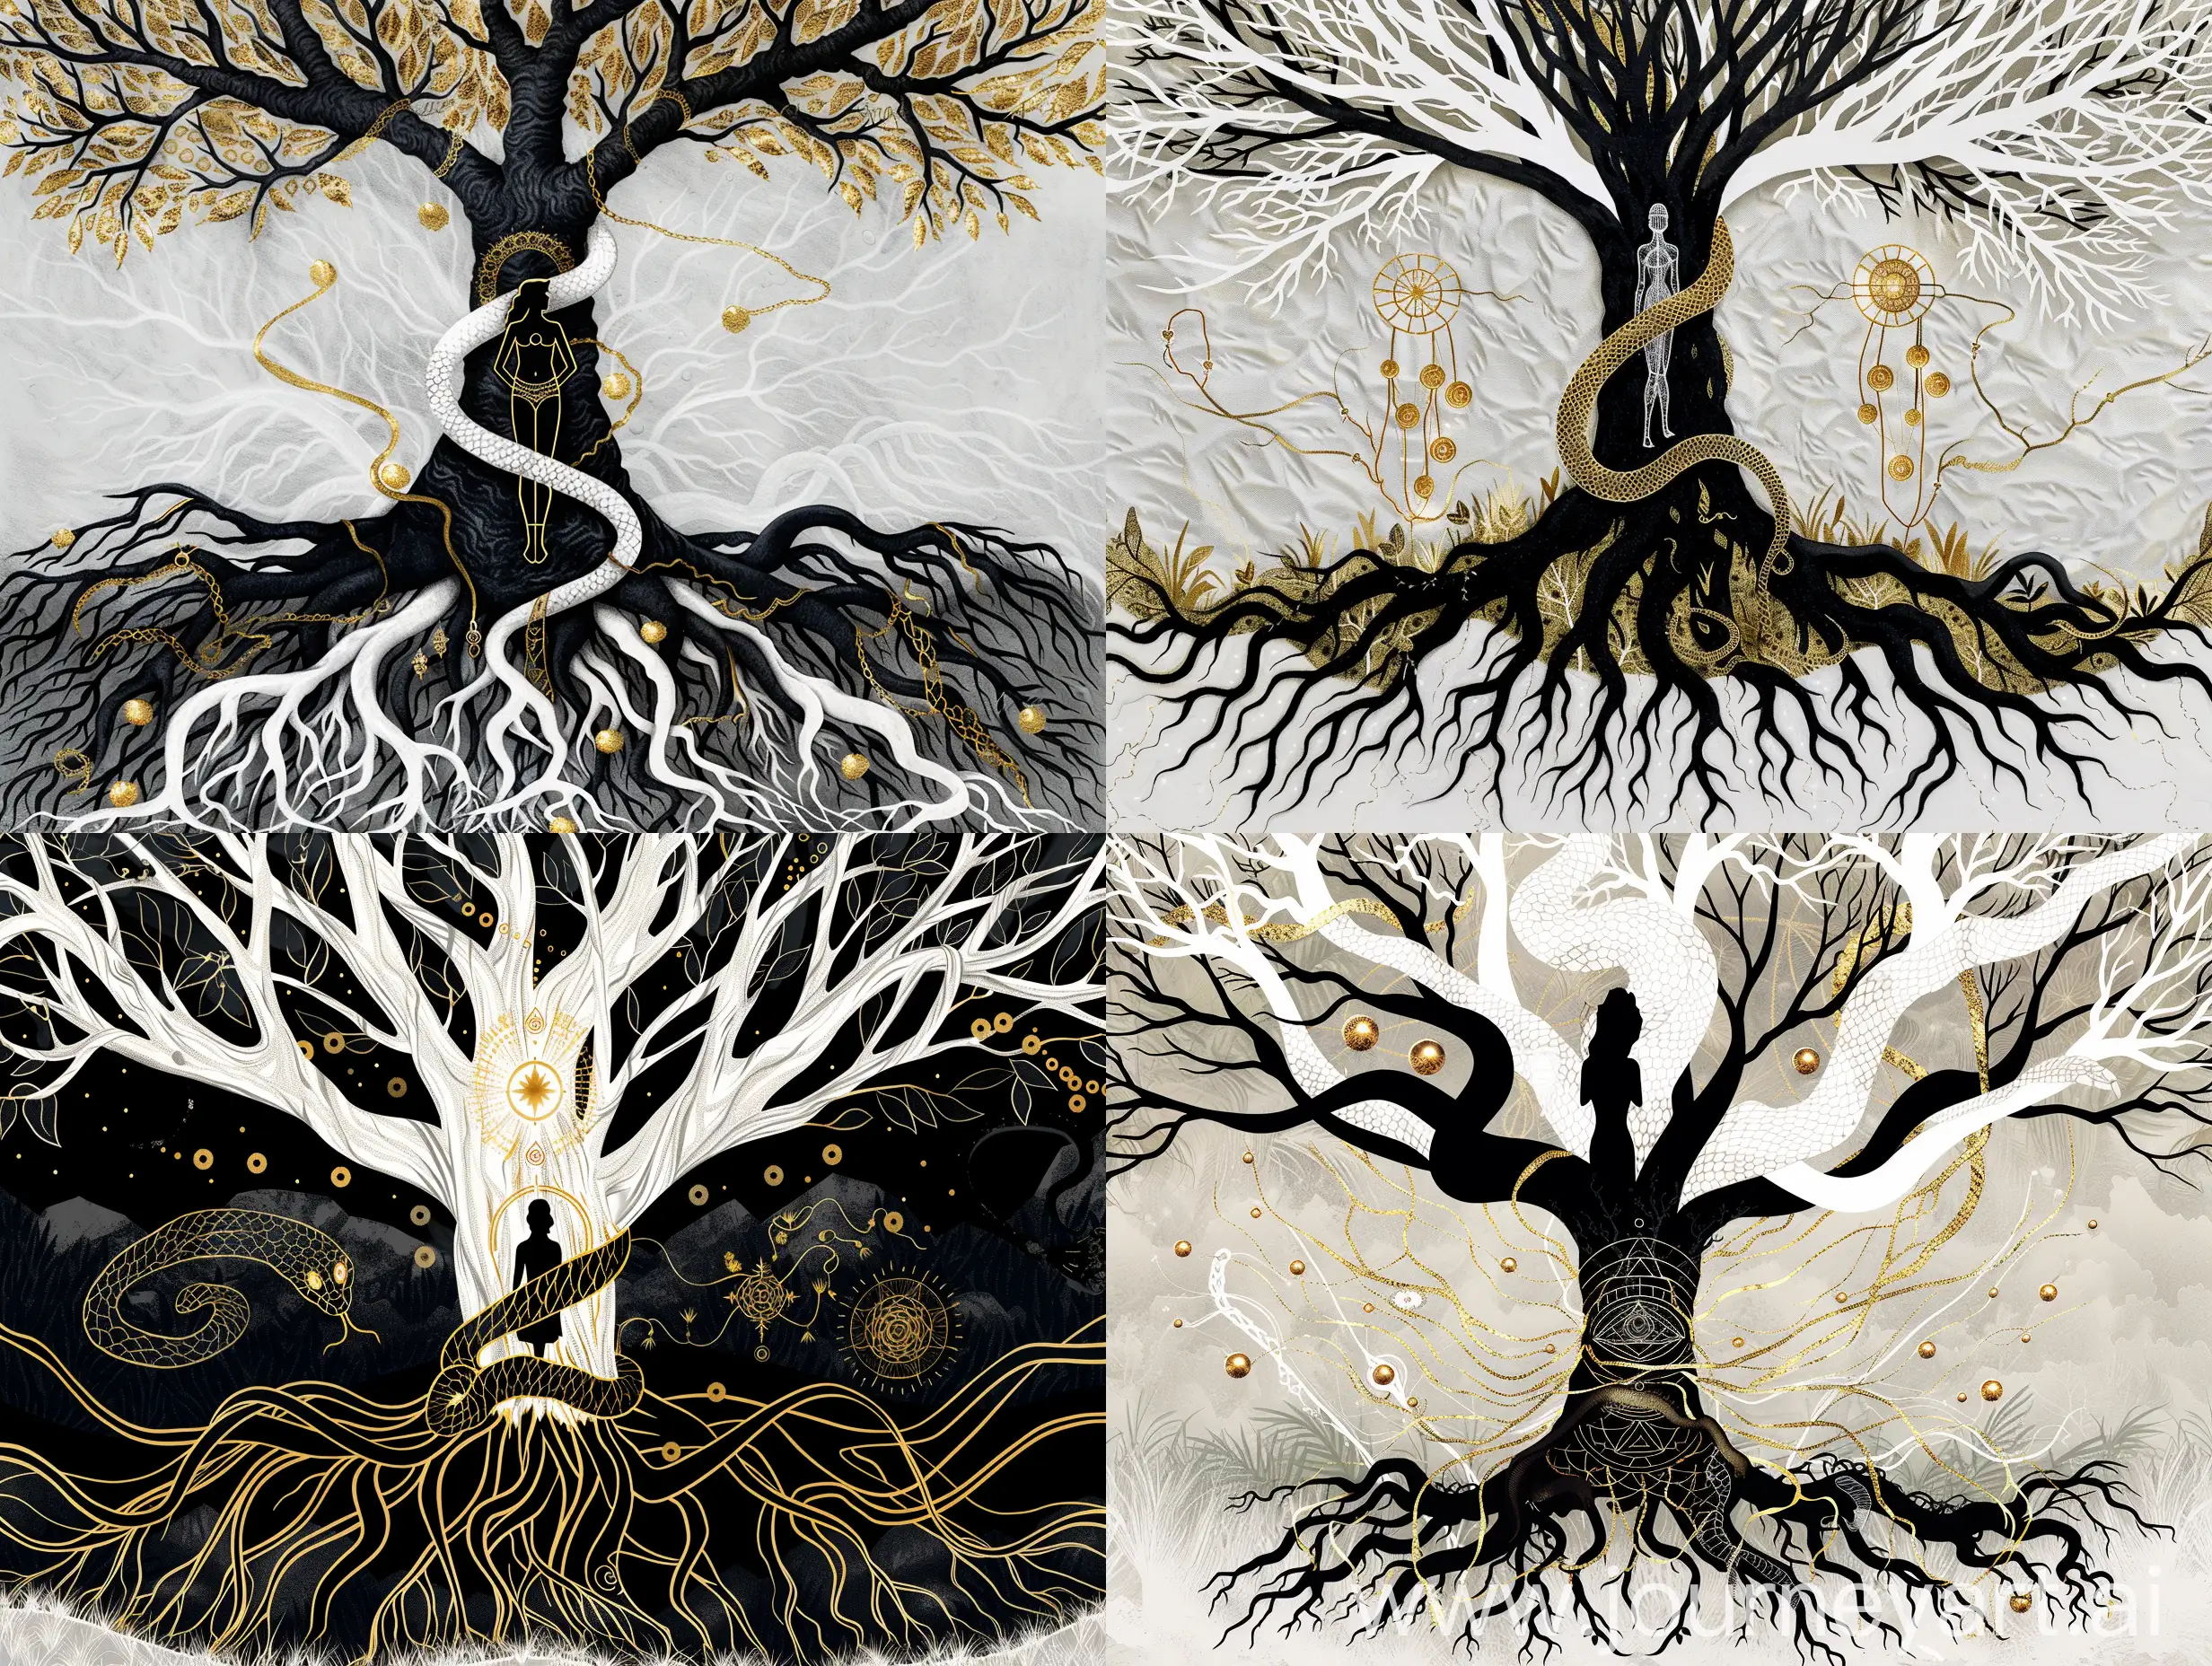 Serpent-and-Woman-in-Gold-Monochrome-Tree-of-Conscious-and-Unconscious-Minds